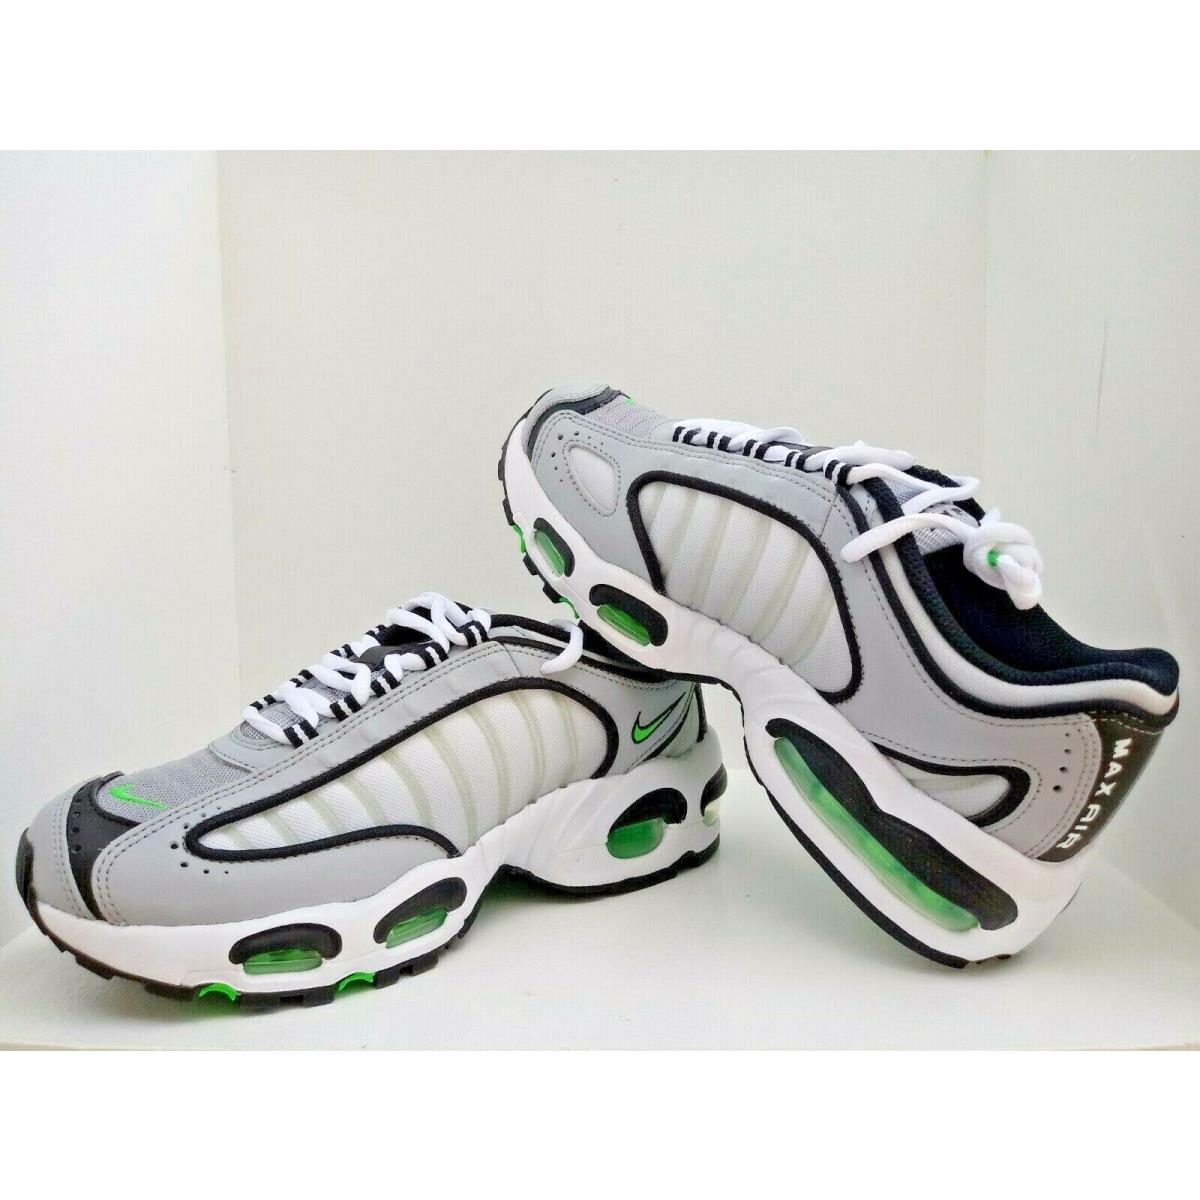 Nike shoes  - Wolf Grey/Black-Green Spark-White 2